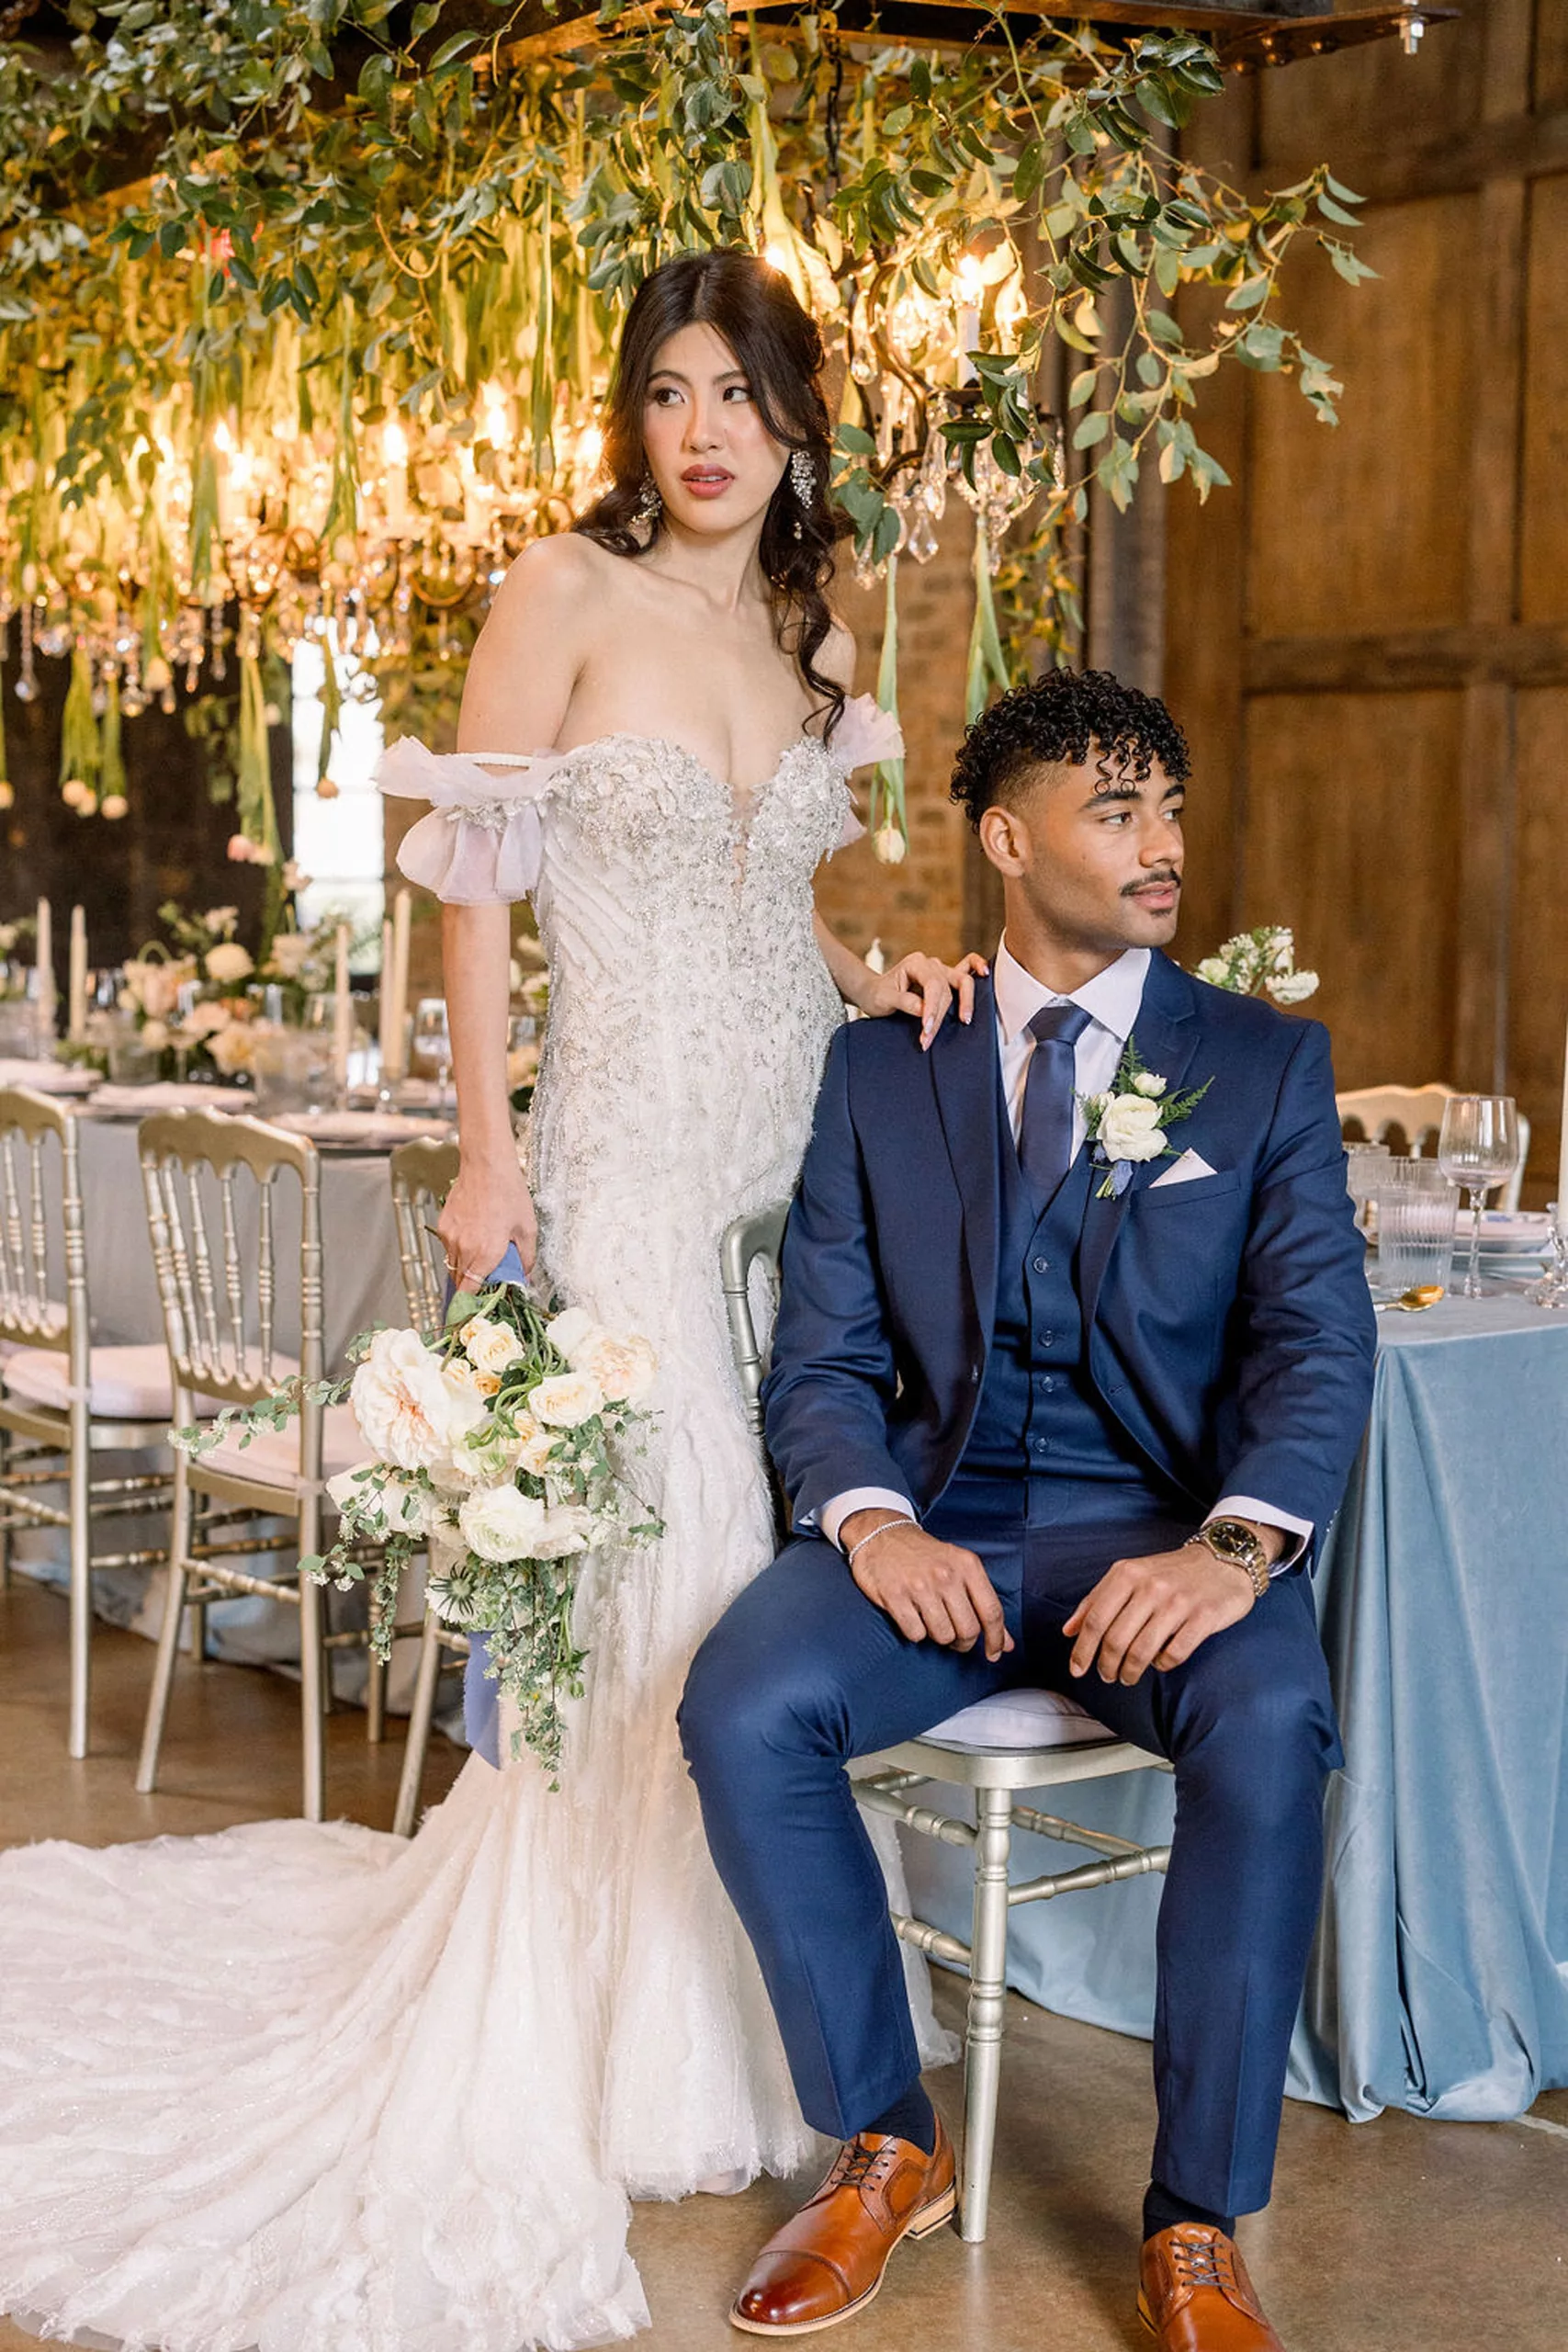 A groom in a blue suit sits at a wedding reception table with silver chairs and blue linens with his bride standing behind him with a hand on his shoulder